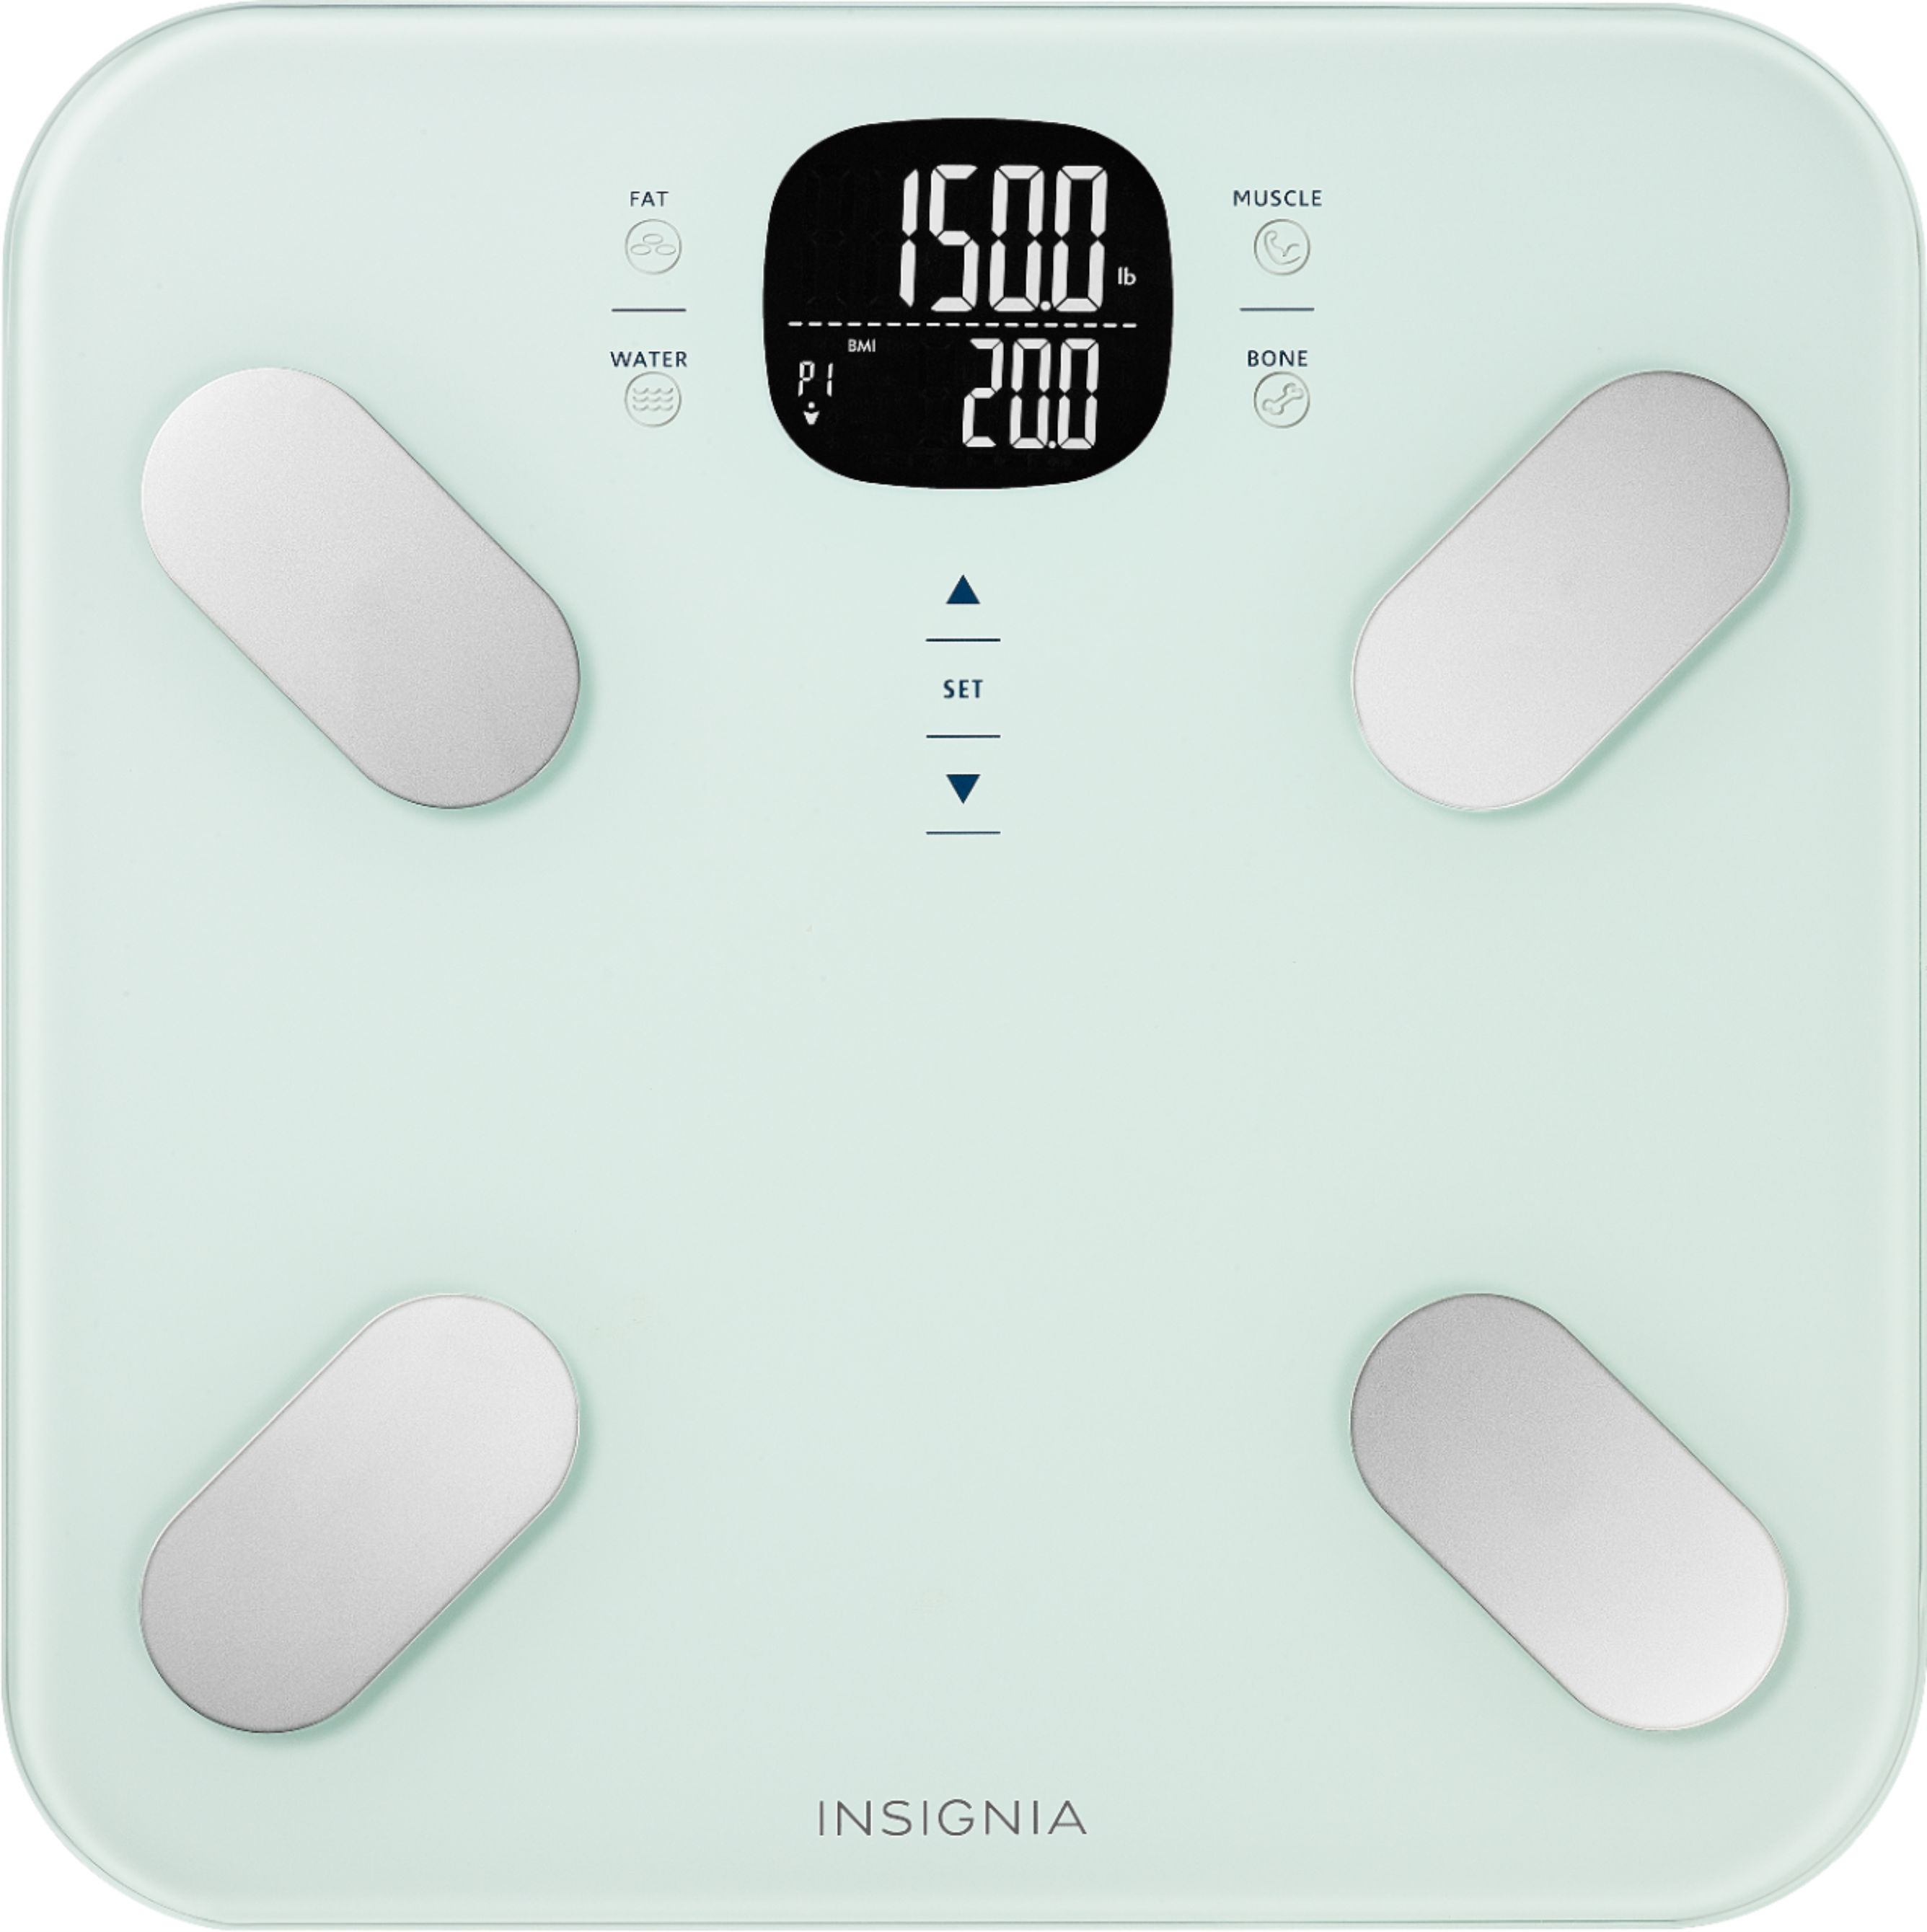 Body Fat Composition Scales for Hospitals